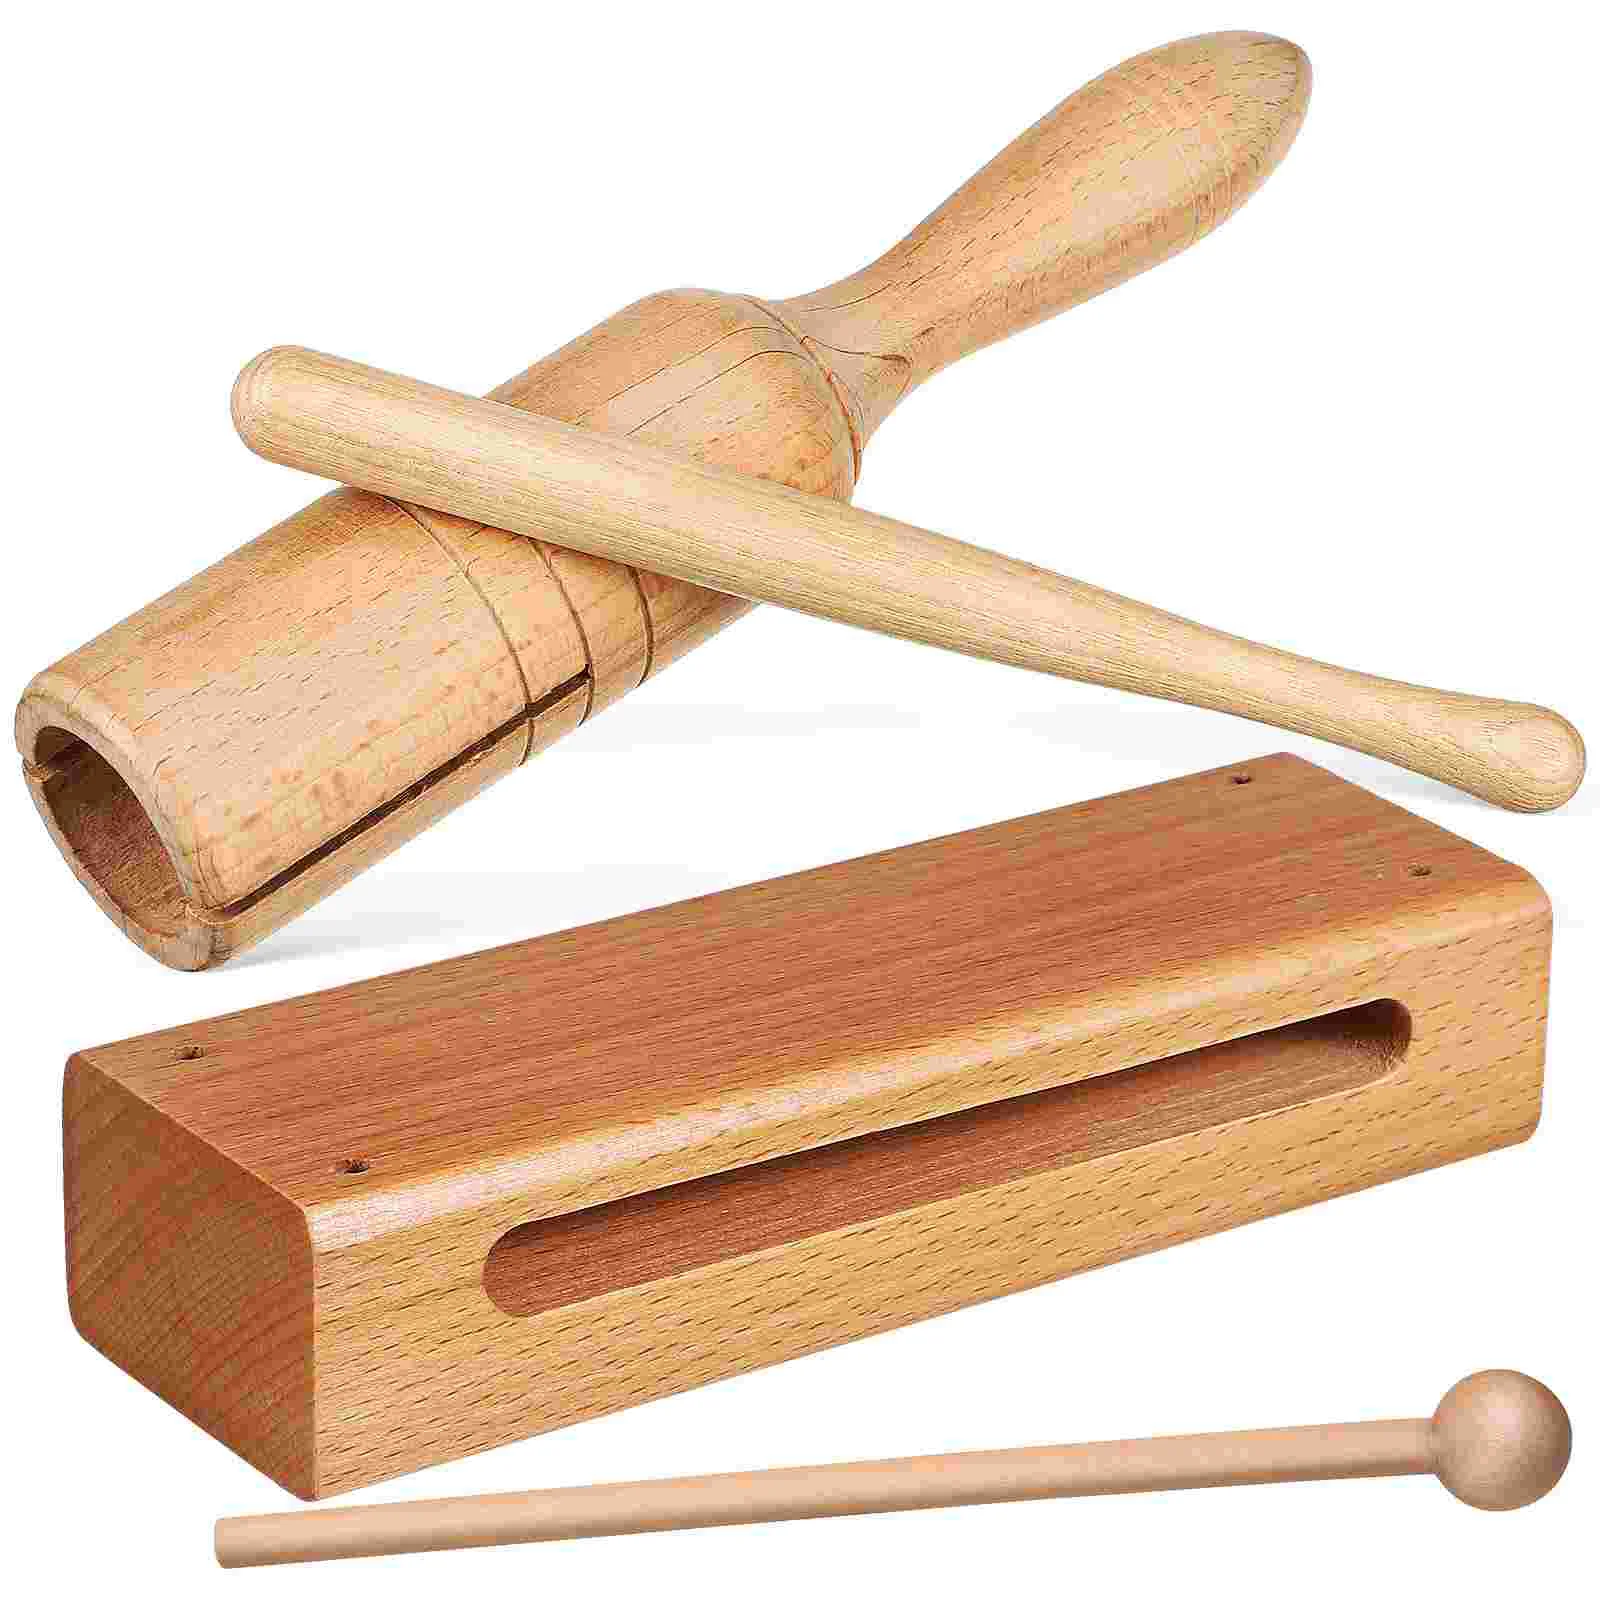 

2 Sets Orff Instrument Handheld Wood Block Chimes Mallets Wooden Building Blocks Rhythm Beater Gavel Percussion